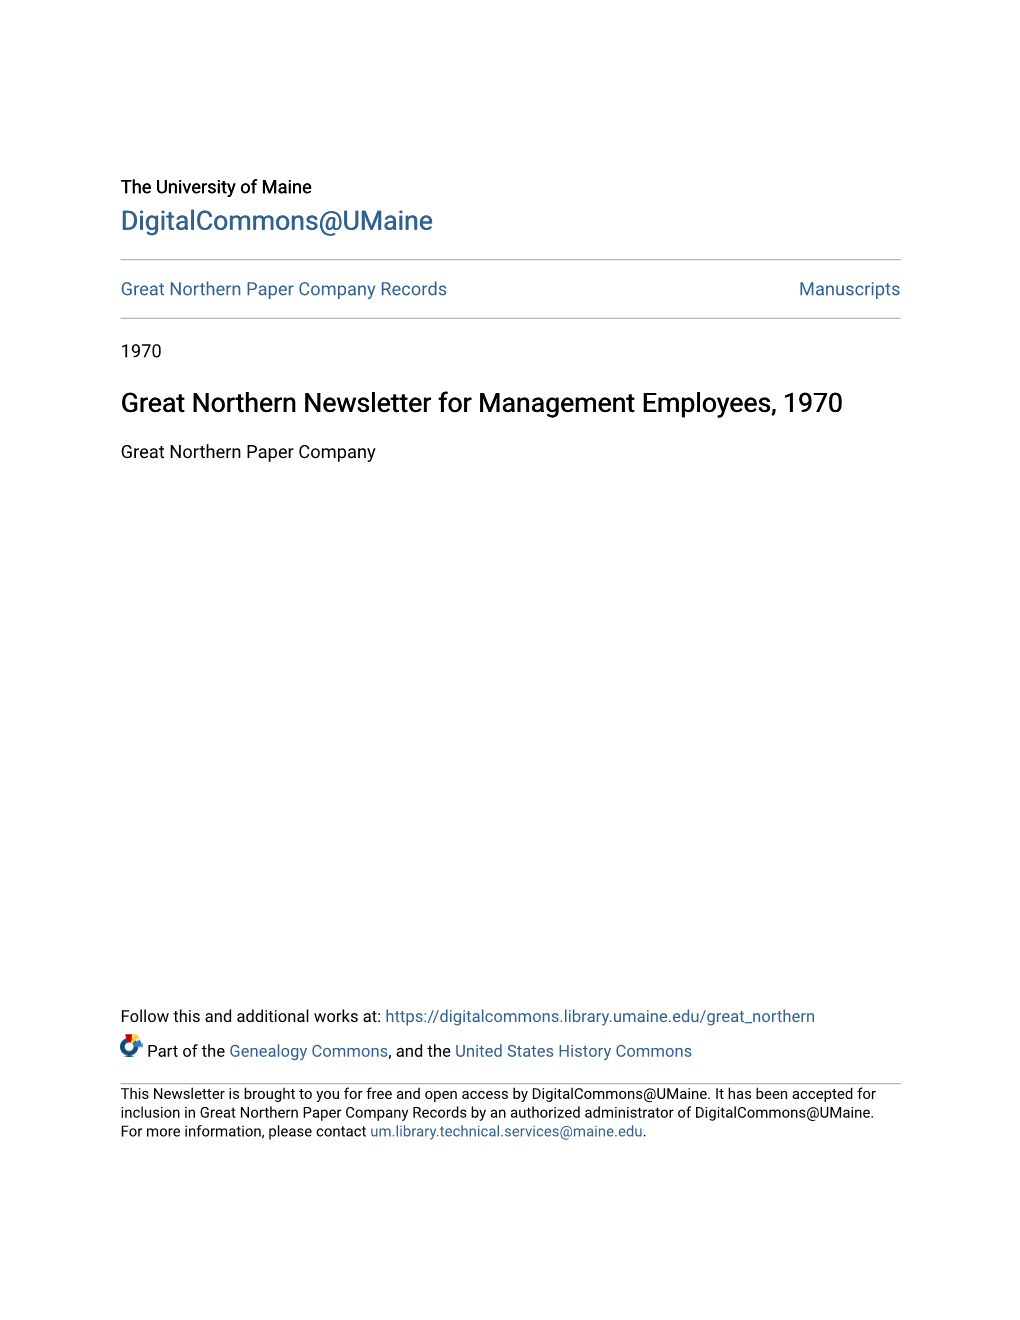 Great Northern Newsletter for Management Employees, 1970